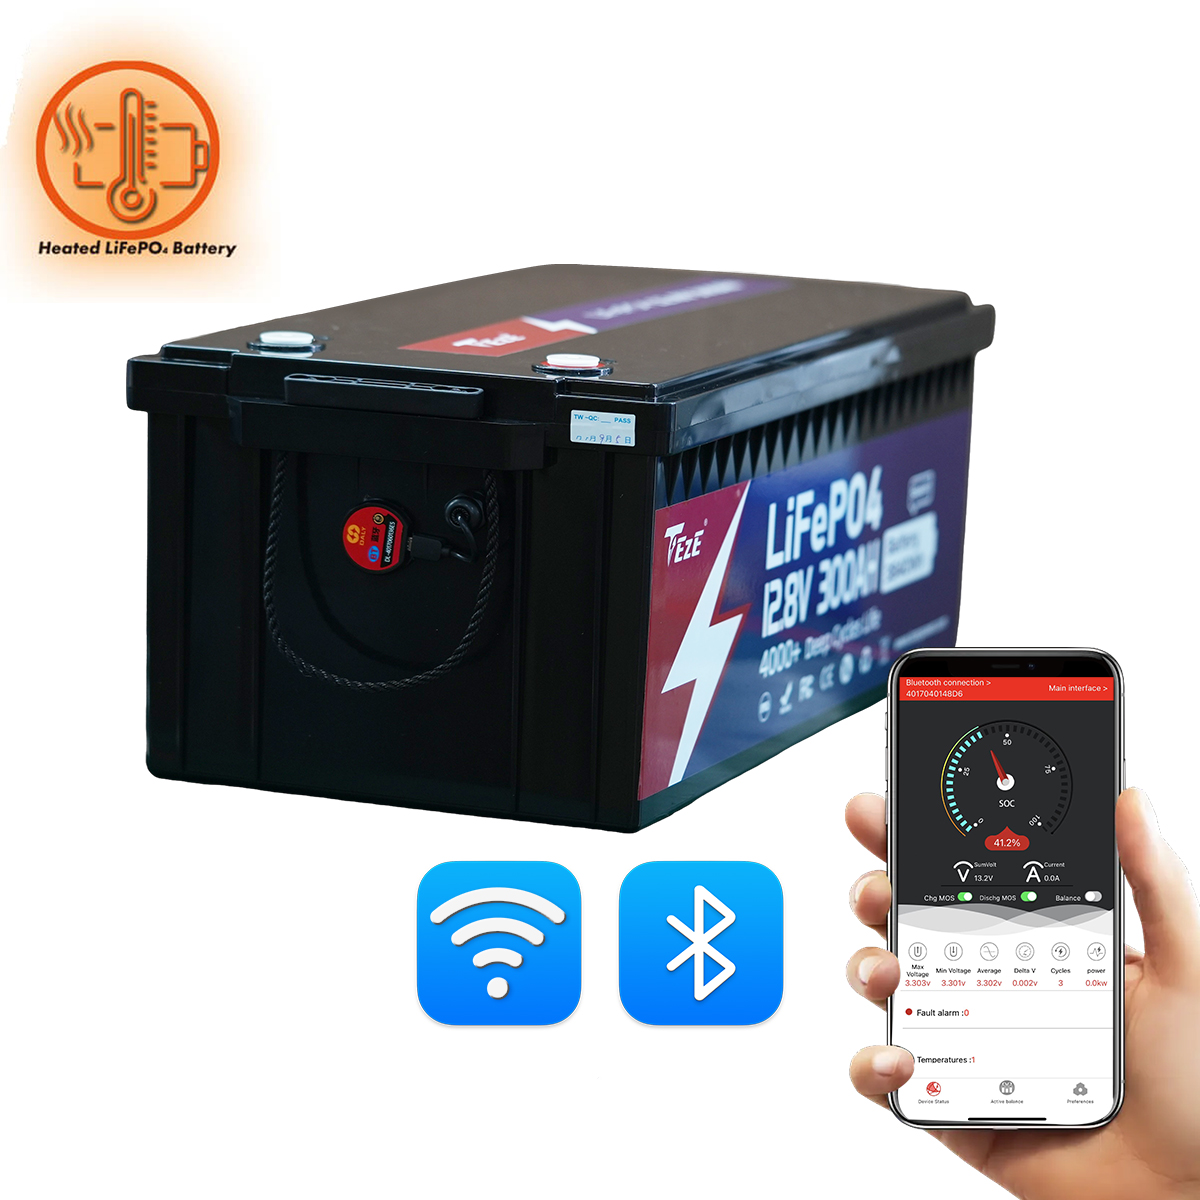 New Add WiFi-TezePower 12V 300Ah LiFePO4 Battery with WIFI and Bluetooth, Self-heating and Active Balancer, Built-in 200A Daly BMS(WIFI External Version)